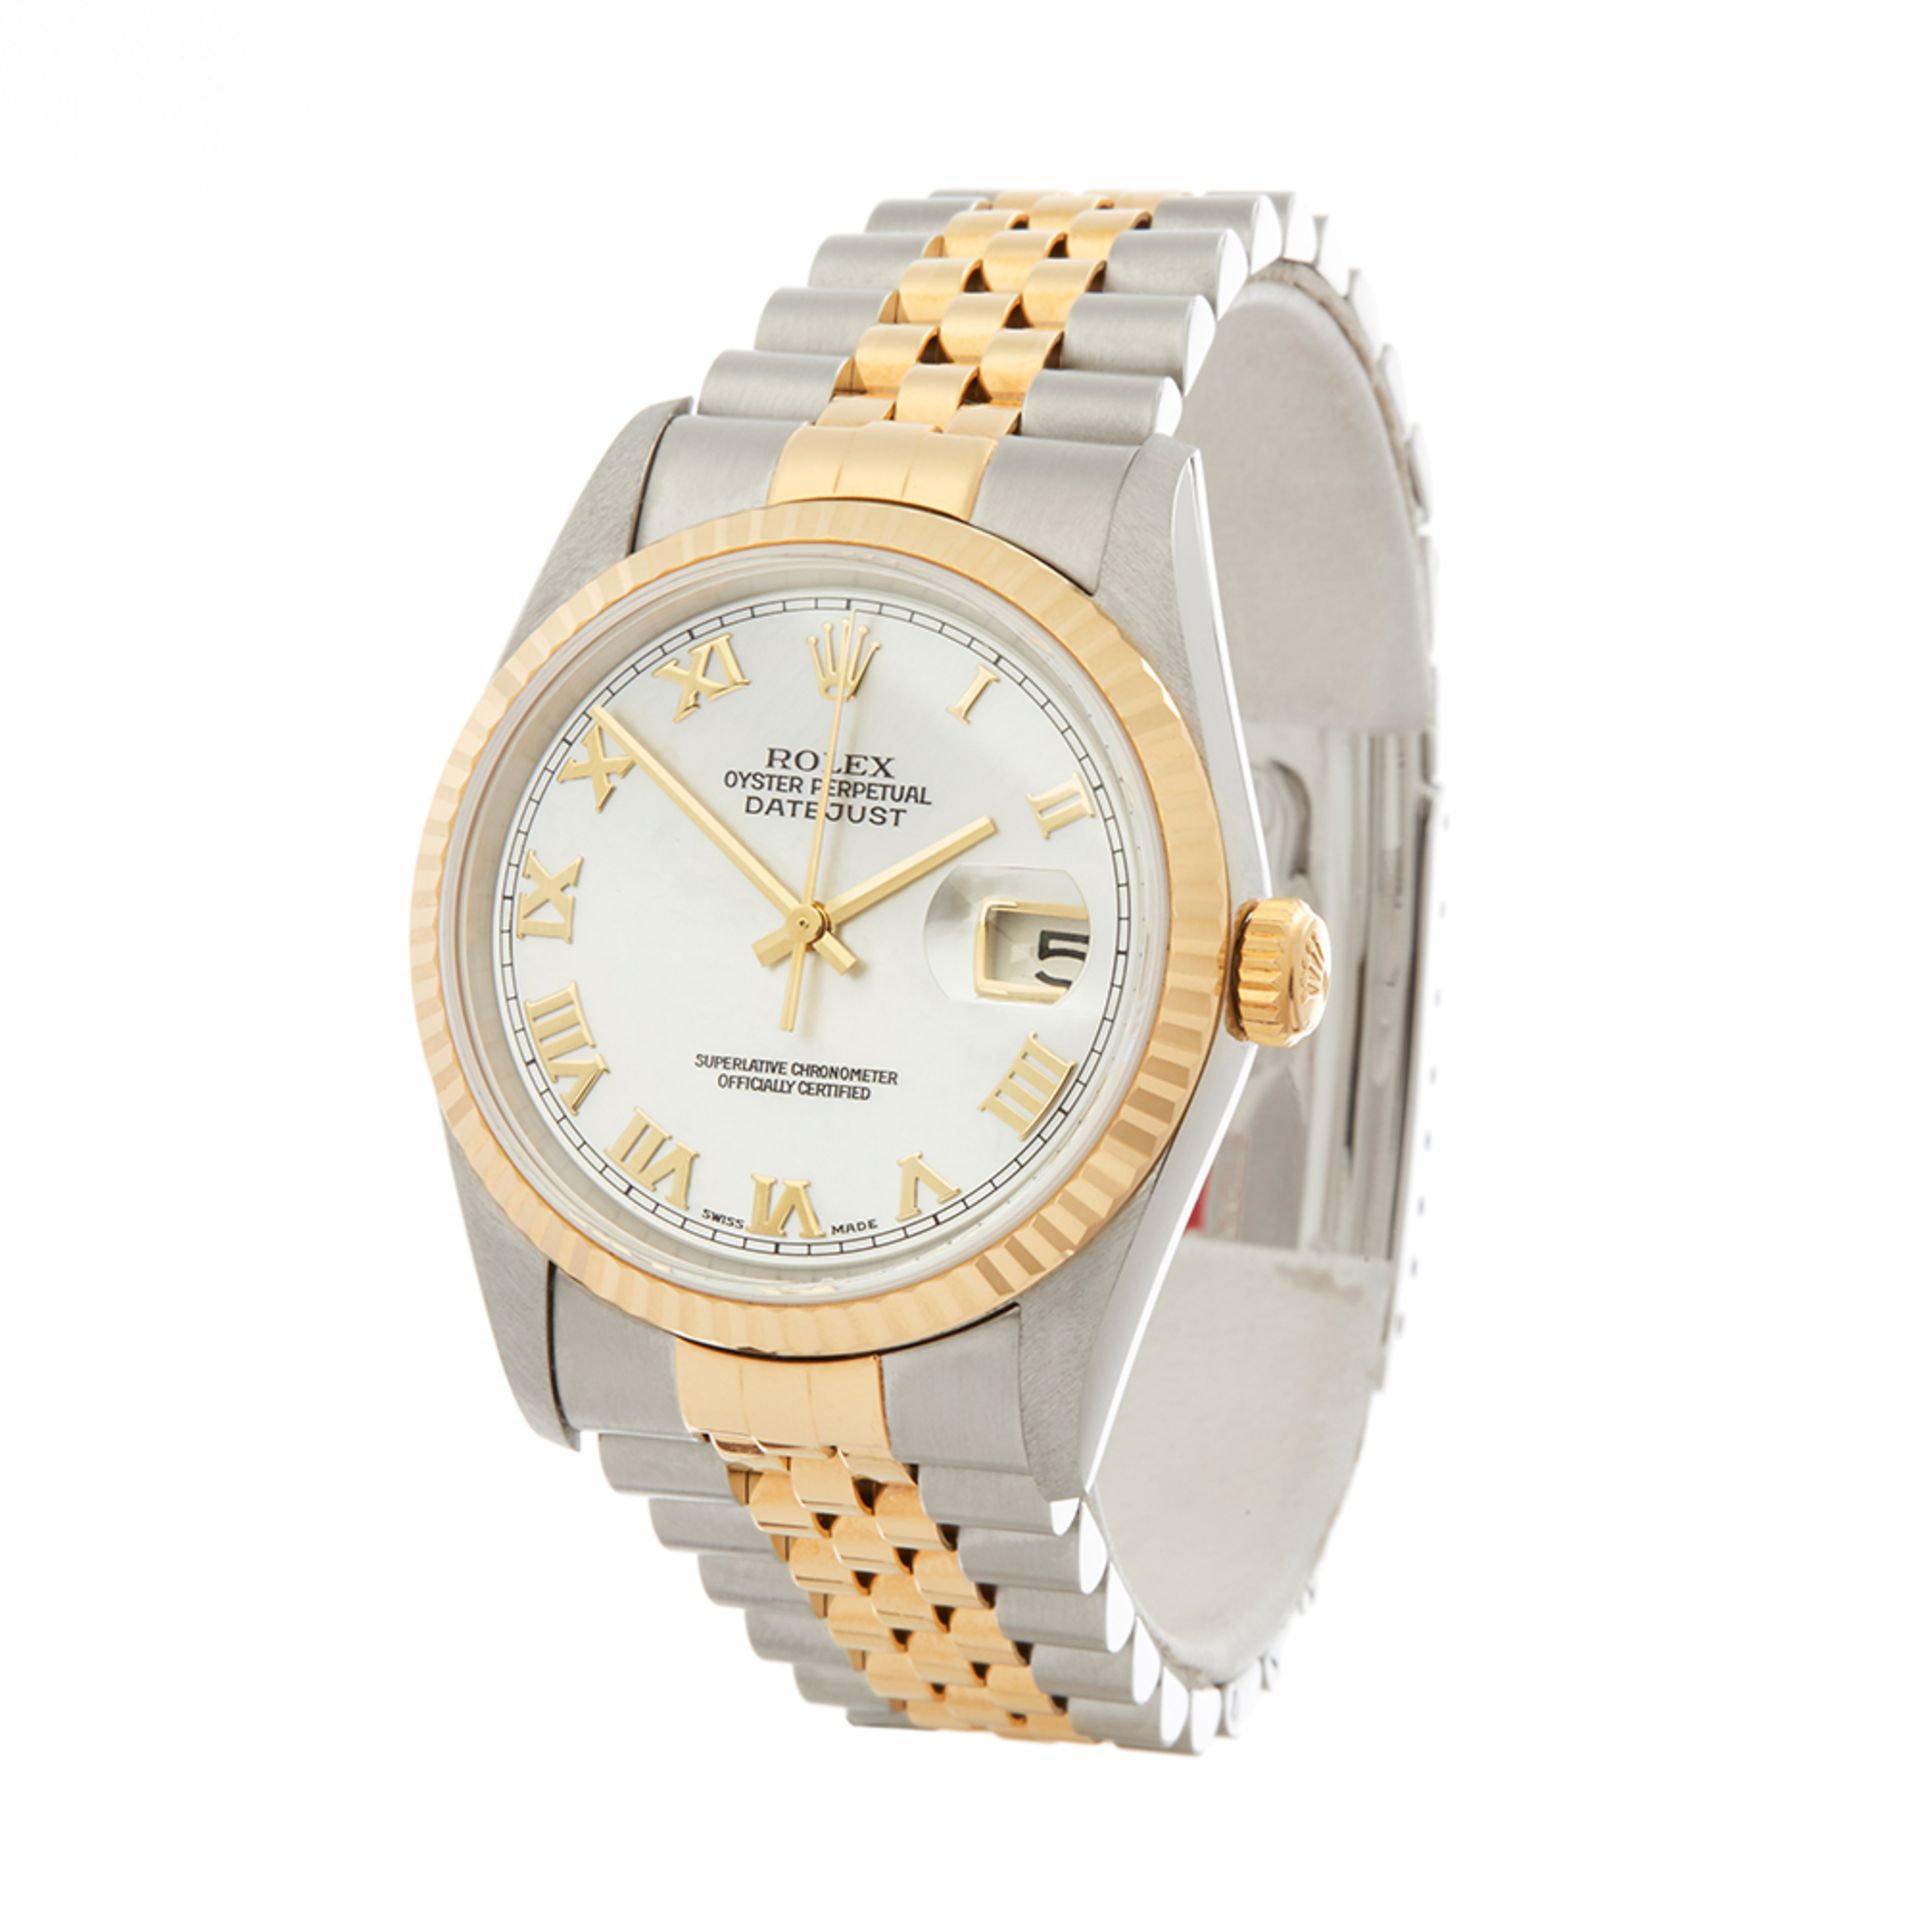 Rolex Datejust 36 Stainless Steel & 18K Yellow Gold - 16233 - Image 3 of 7